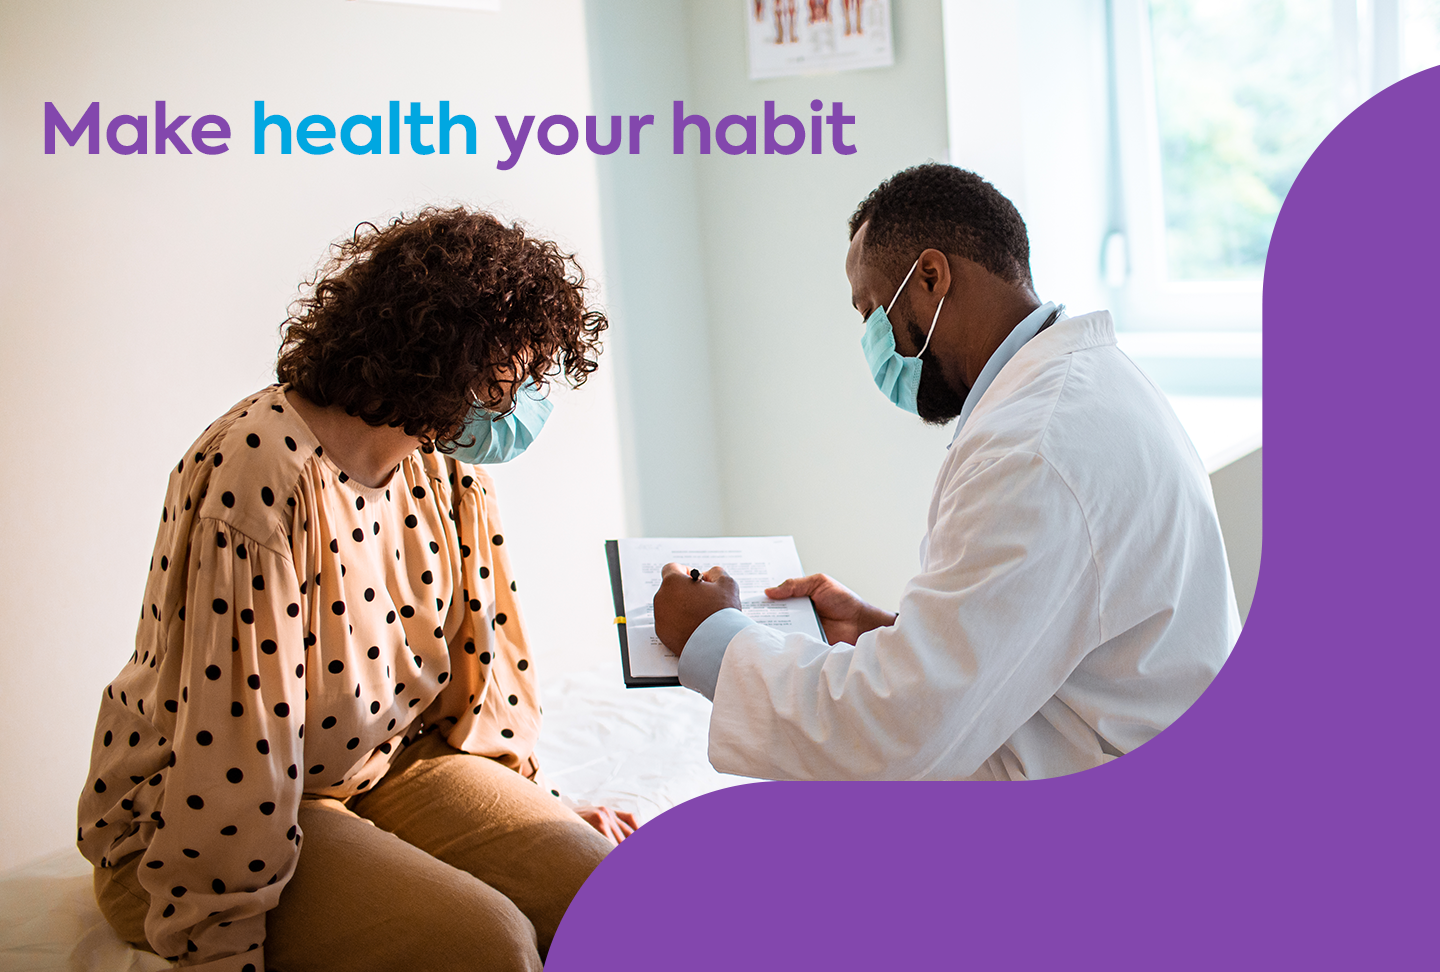 Provider speaking with patient. Text reads "make health your habit"